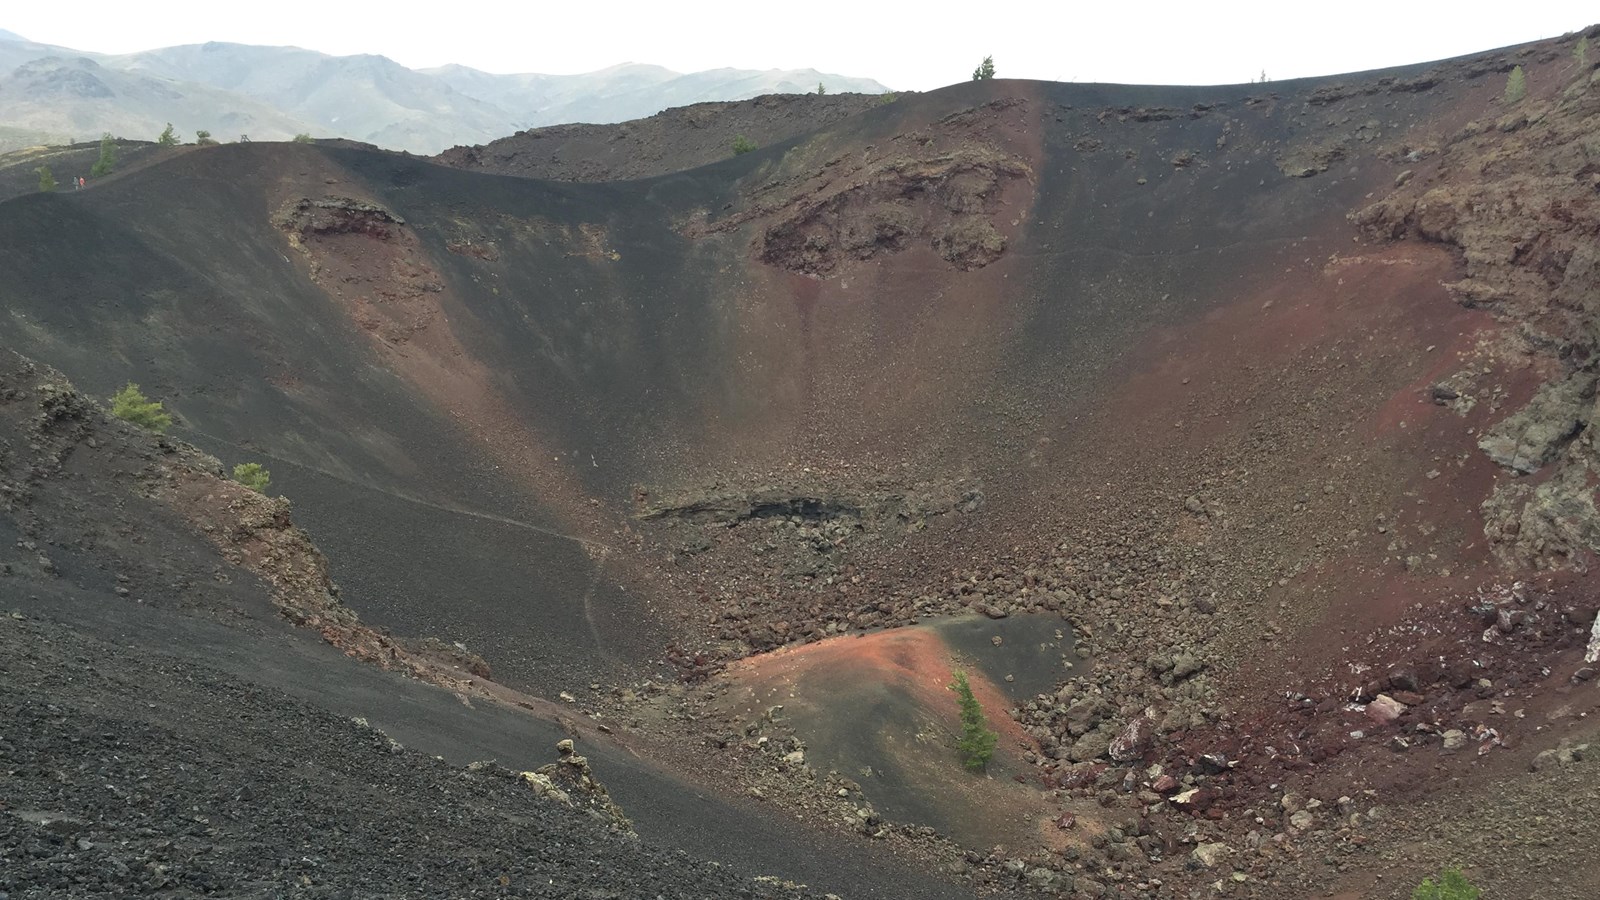 a large volcanic crater with black and reddish-brown stripes around the edges